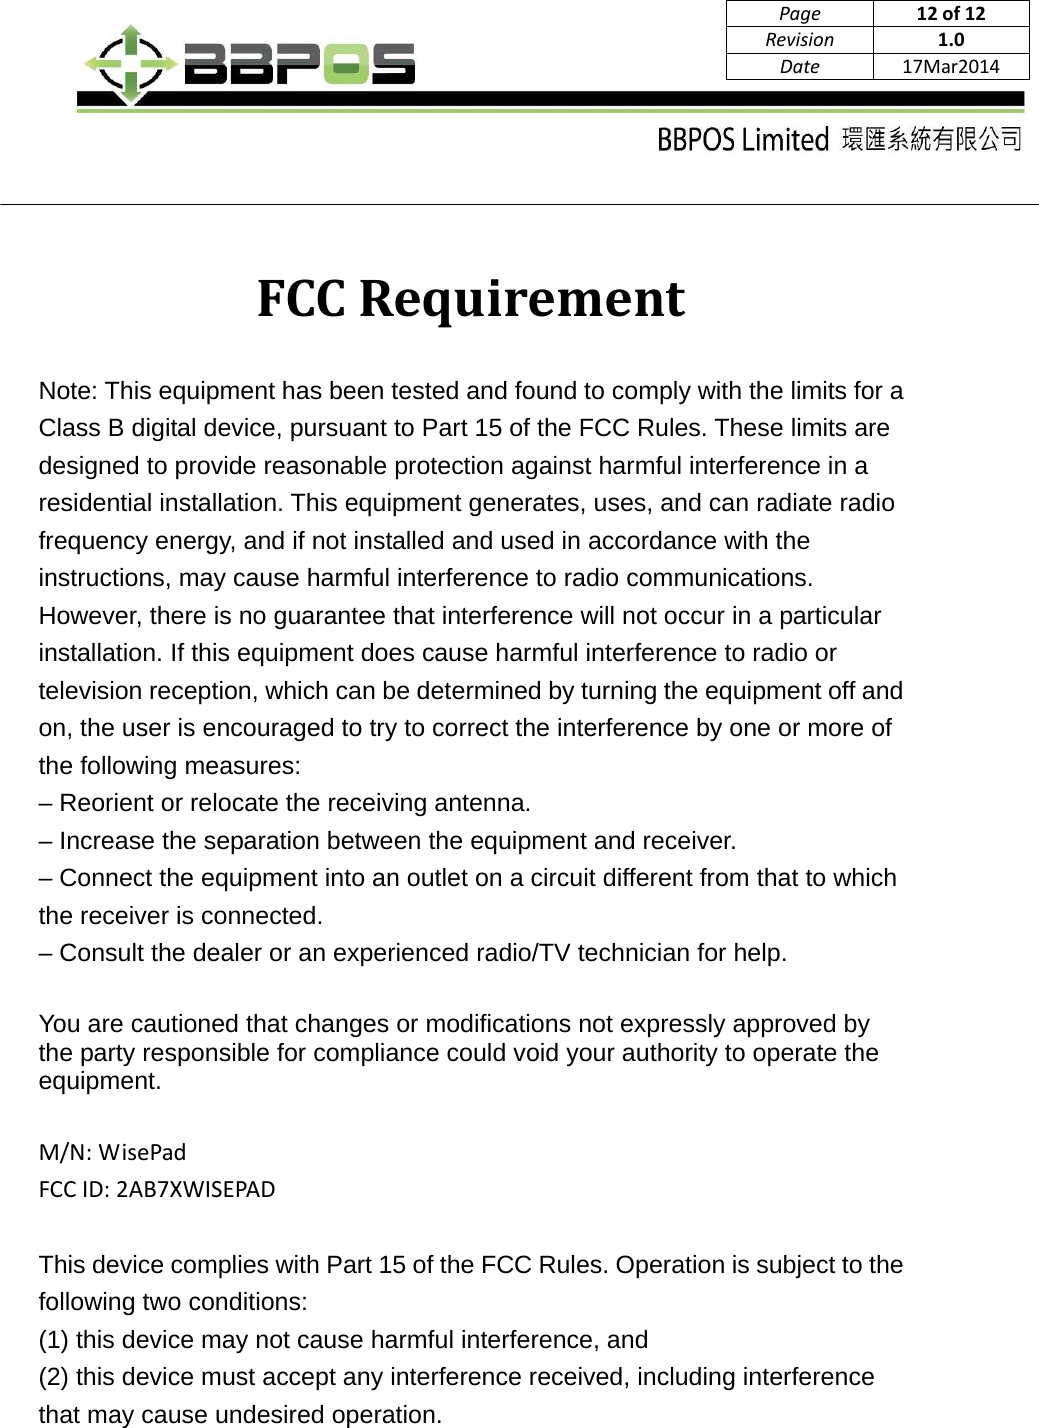      Page12 of12Revision1.0Date17Mar2014FCCRequirementNote: This equipment has been tested and found to comply with the limits for a Class B digital device, pursuant to Part 15 of the FCC Rules. These limits are designed to provide reasonable protection against harmful interference in a residential installation. This equipment generates, uses, and can radiate radio frequency energy, and if not installed and used in accordance with the instructions, may cause harmful interference to radio communications. However, there is no guarantee that interference will not occur in a particular installation. If this equipment does cause harmful interference to radio or television reception, which can be determined by turning the equipment off and on, the user is encouraged to try to correct the interference by one or more of the following measures: – Reorient or relocate the receiving antenna. – Increase the separation between the equipment and receiver. – Connect the equipment into an outlet on a circuit different from that to which the receiver is connected. – Consult the dealer or an experienced radio/TV technician for help.  You are cautioned that changes or modifications not expressly approved by the party responsible for compliance could void your authority to operate the equipment.M/N:WisePadFCCID:2AB7XWISEPADThis device complies with Part 15 of the FCC Rules. Operation is subject to the following two conditions:   (1) this device may not cause harmful interference, and (2) this device must accept any interference received, including interference that may cause undesired operation. 